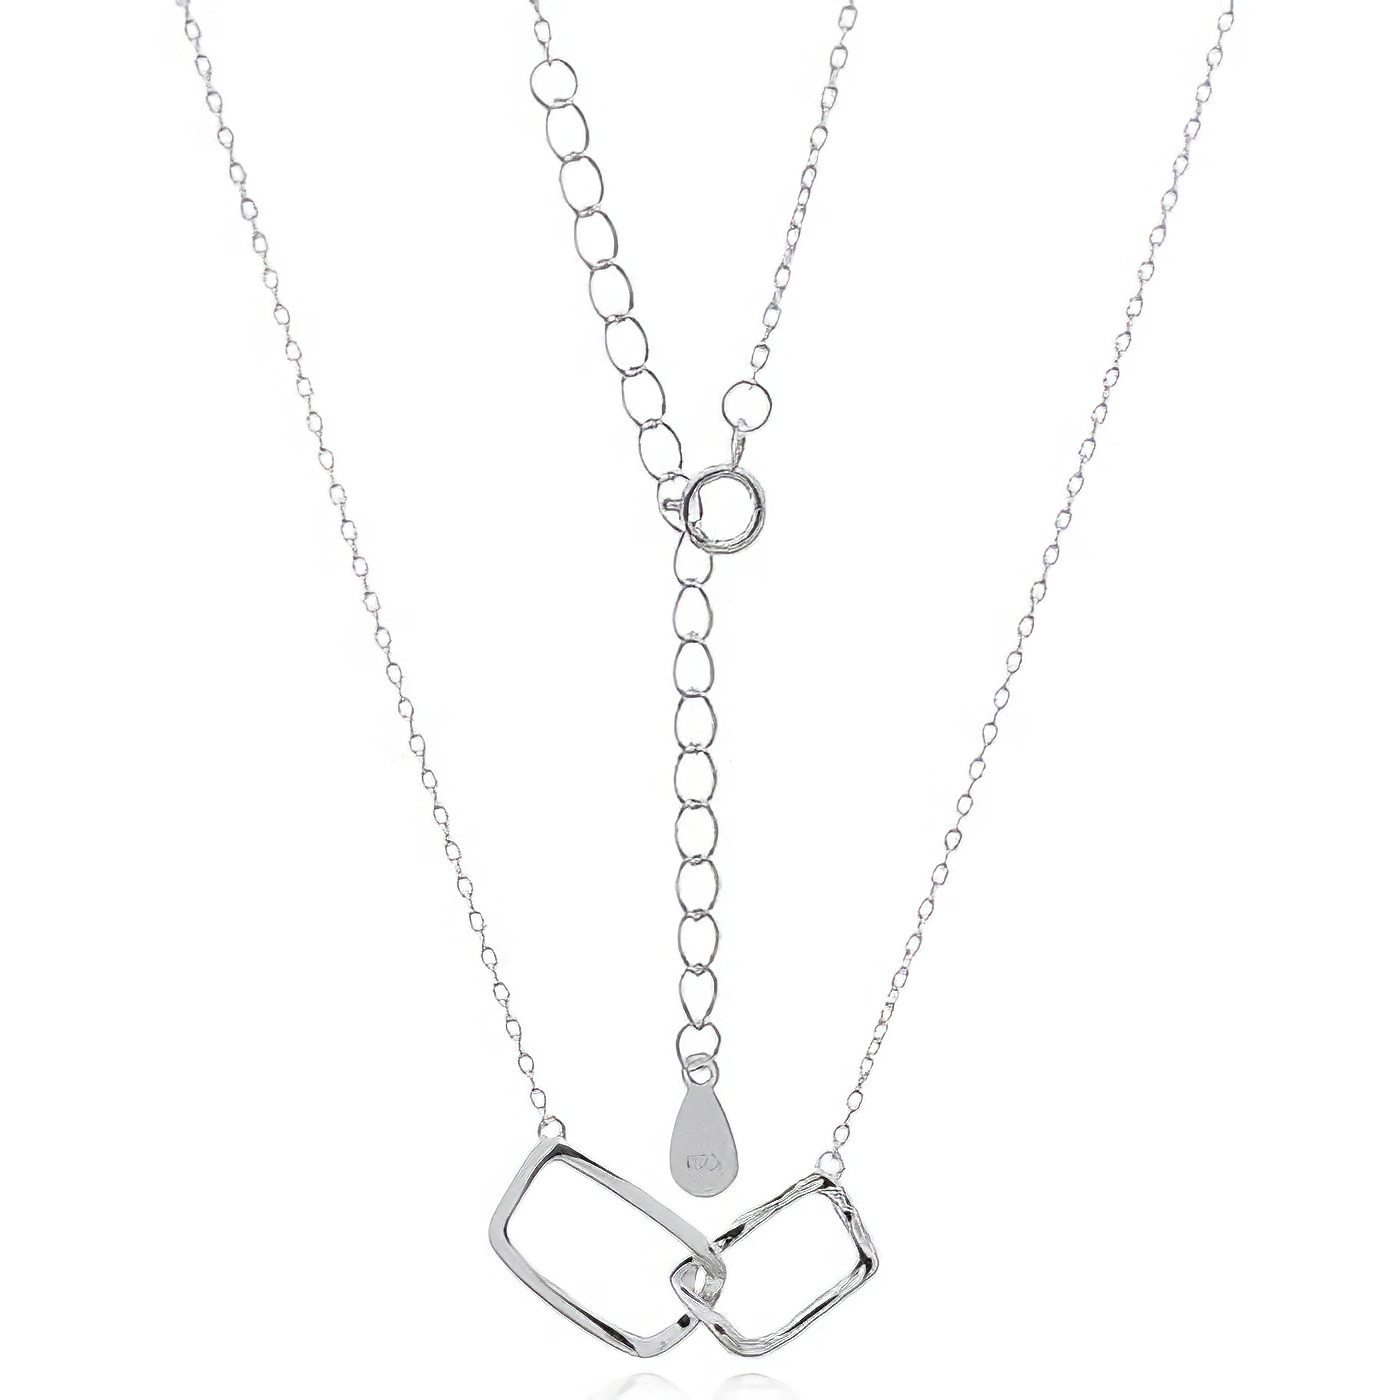 Interlocking Square Pendant Sterling Silver Necklace by BeYindi 